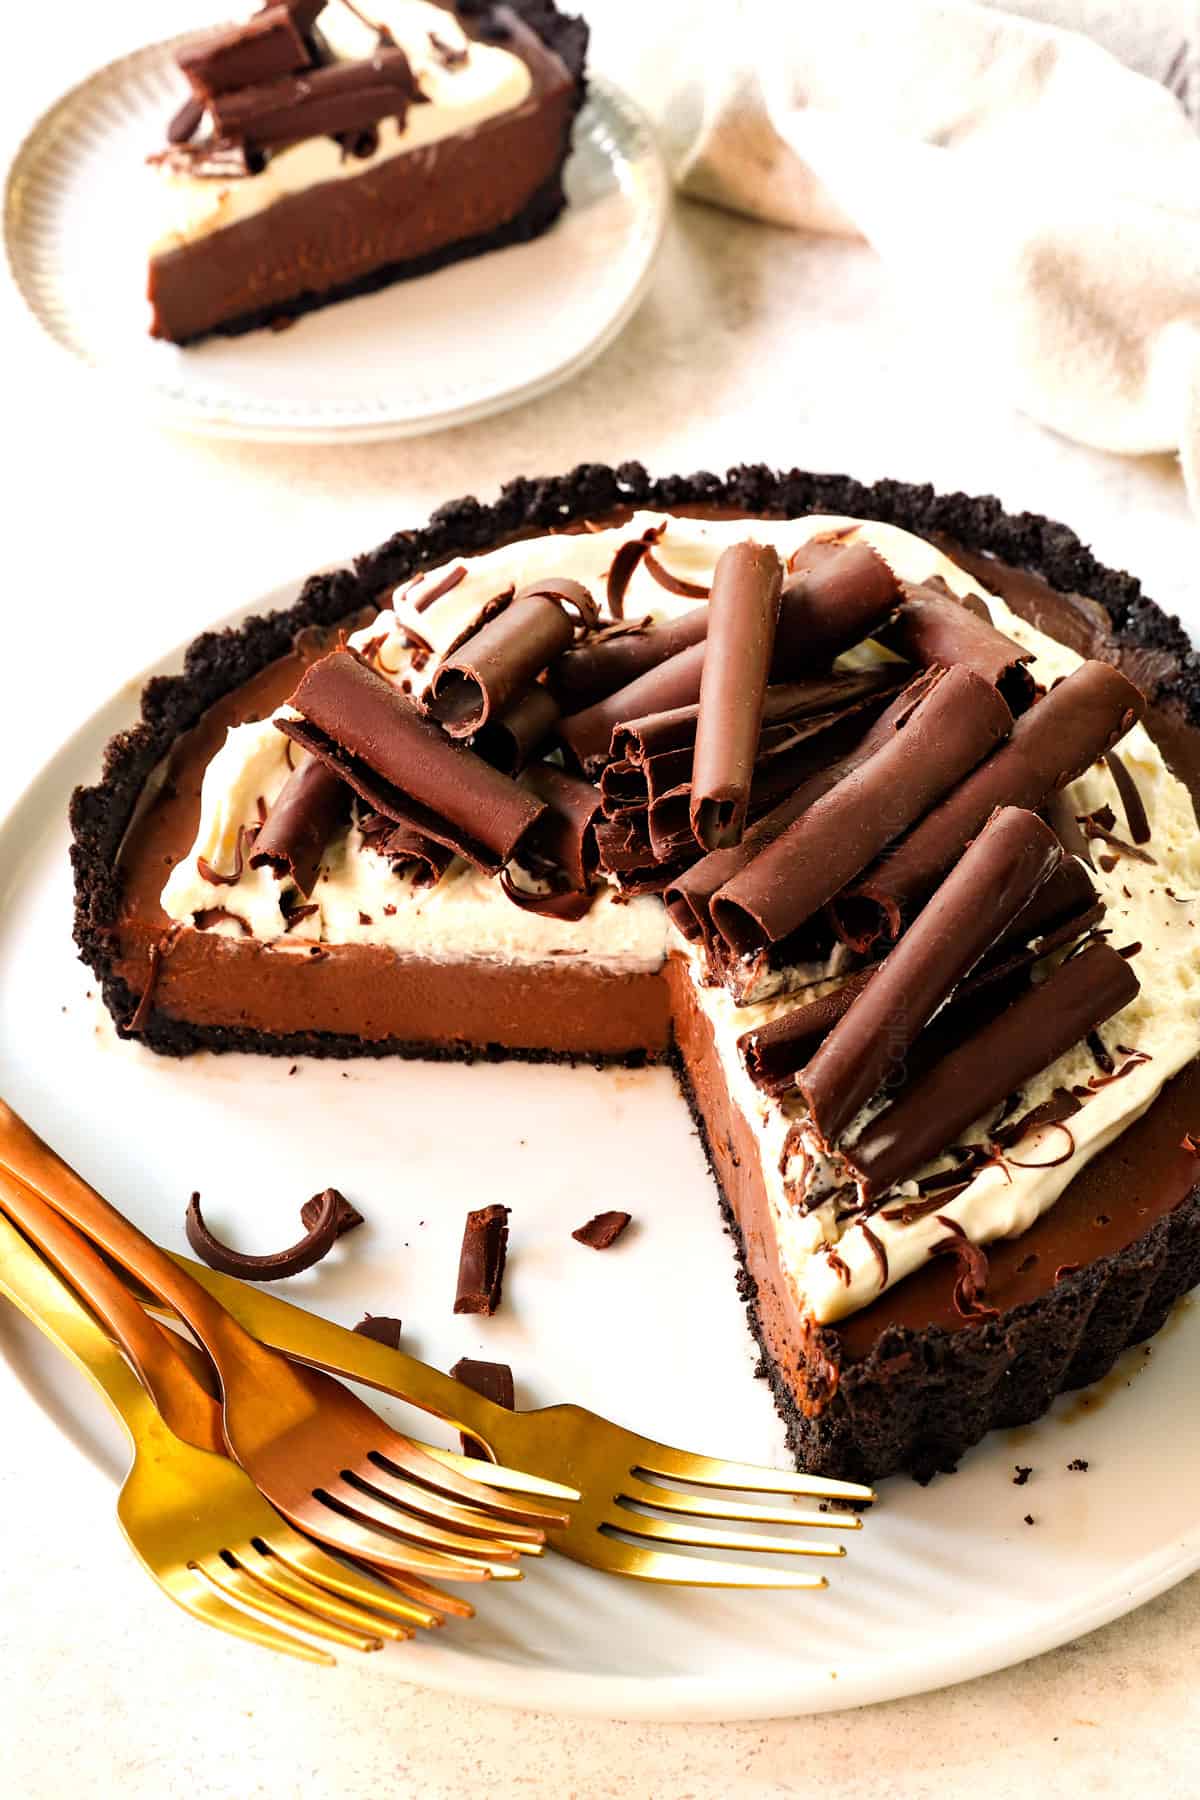 side view of chocolate cream pie with a few slices missing showing the creamy filling